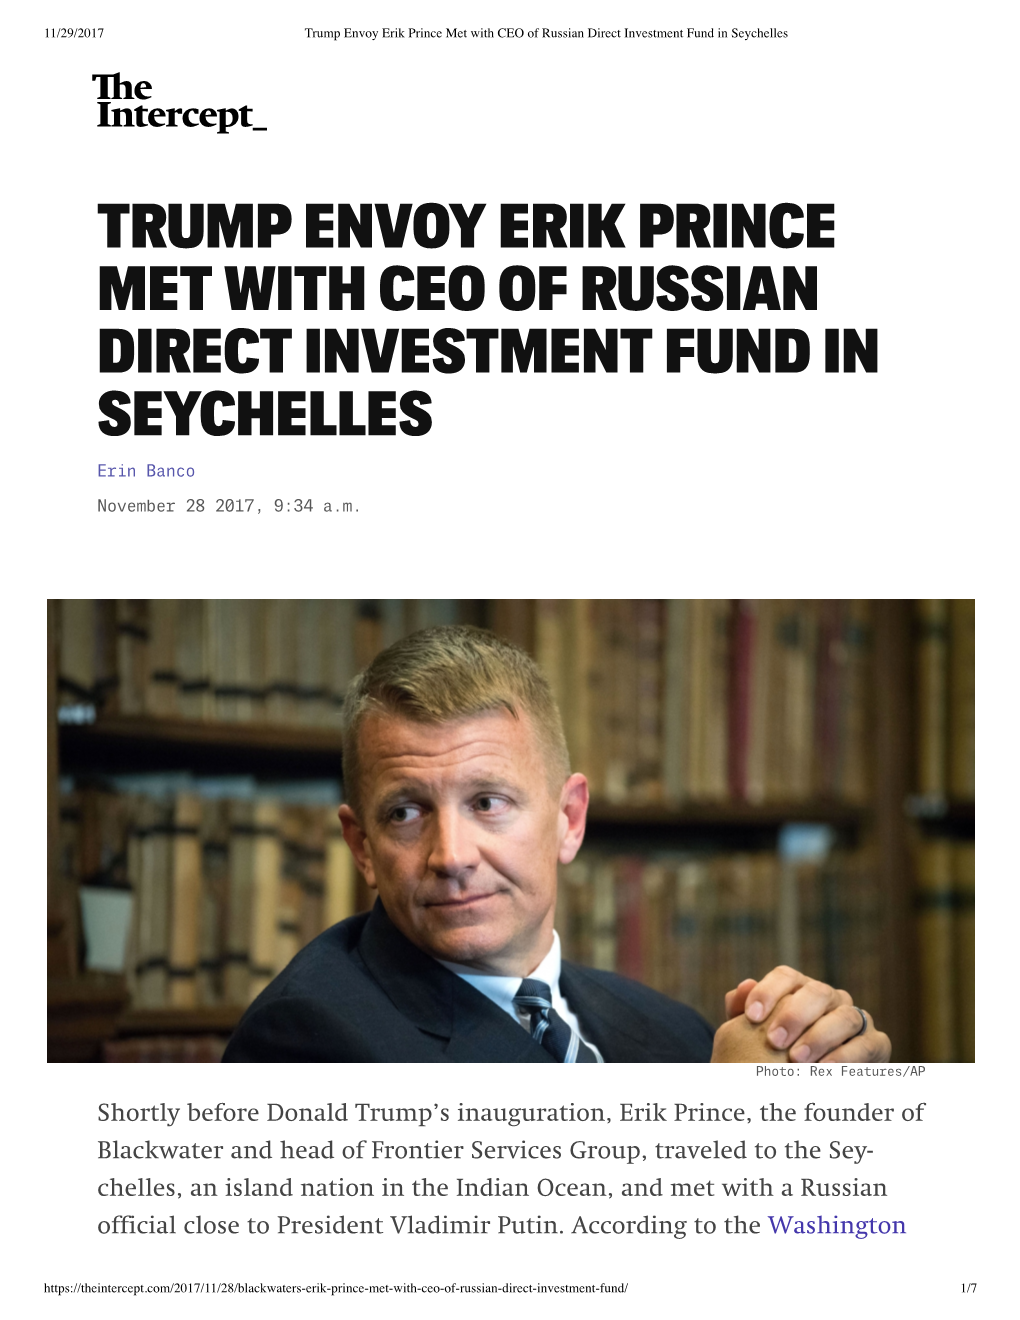 Trump Envoy Erik Prince Met with CEO of Russian Direct Investment Fund in Seychelles